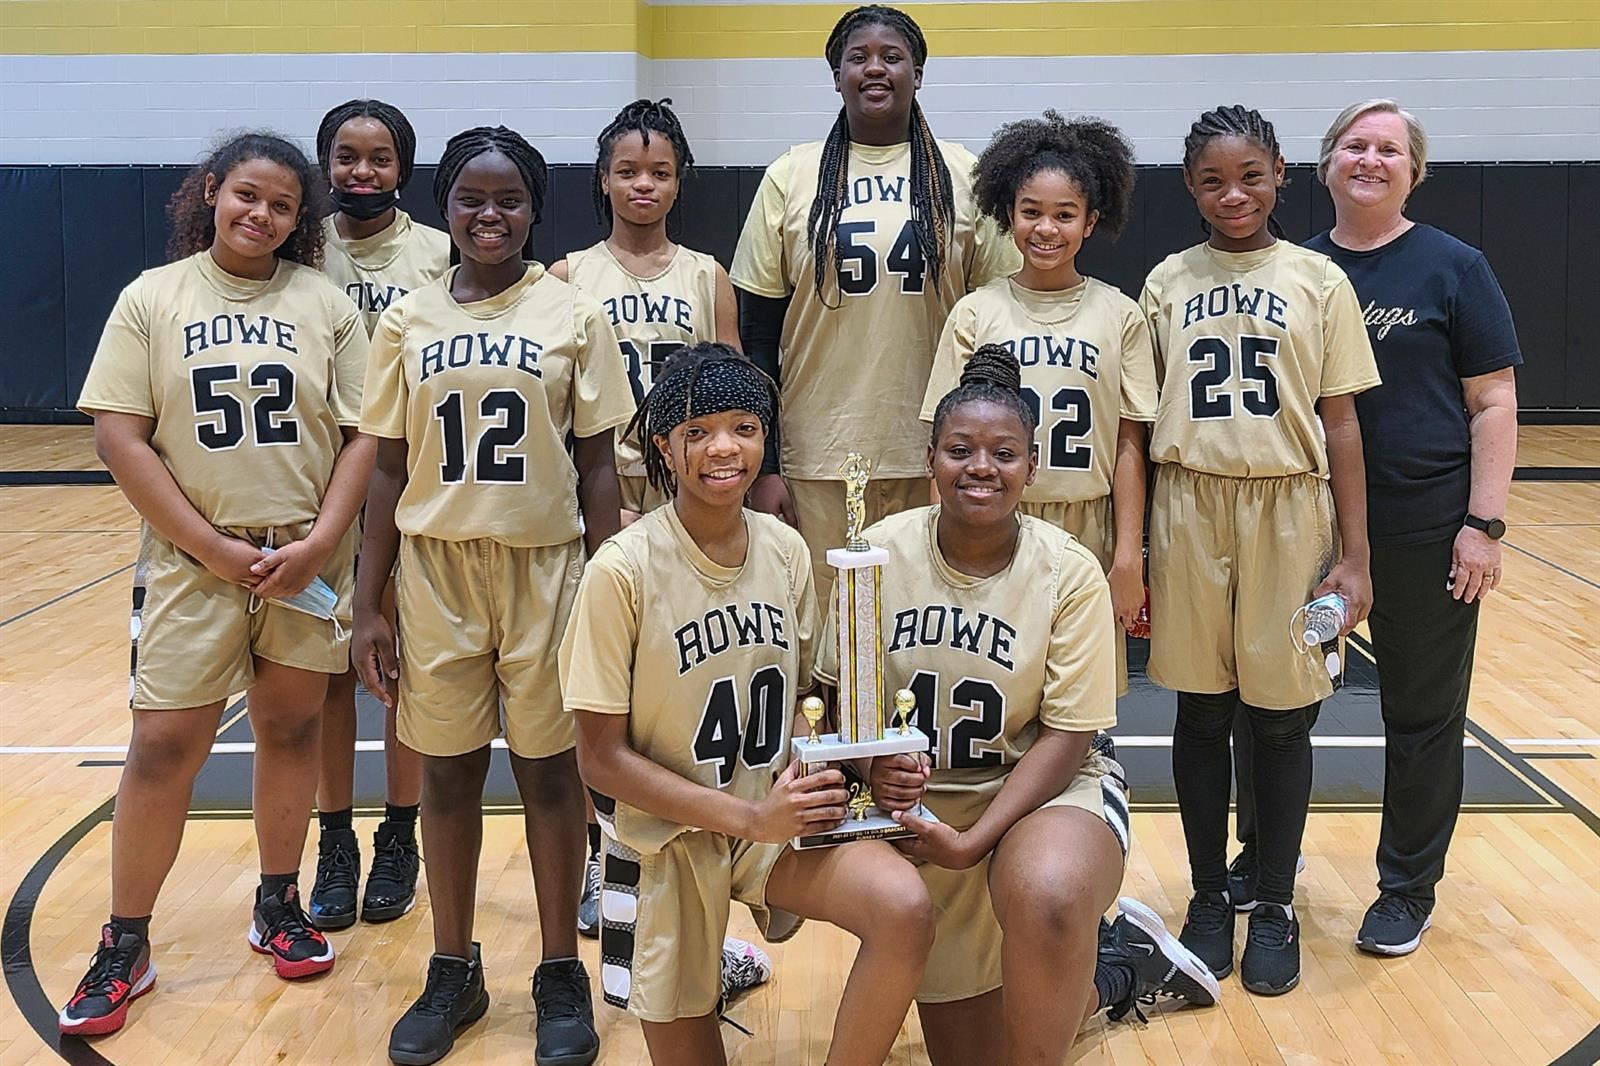 The Rowe Jaguars’ seventh grade A team won the Central Division girls’ basketball crown with a 5-0 record.